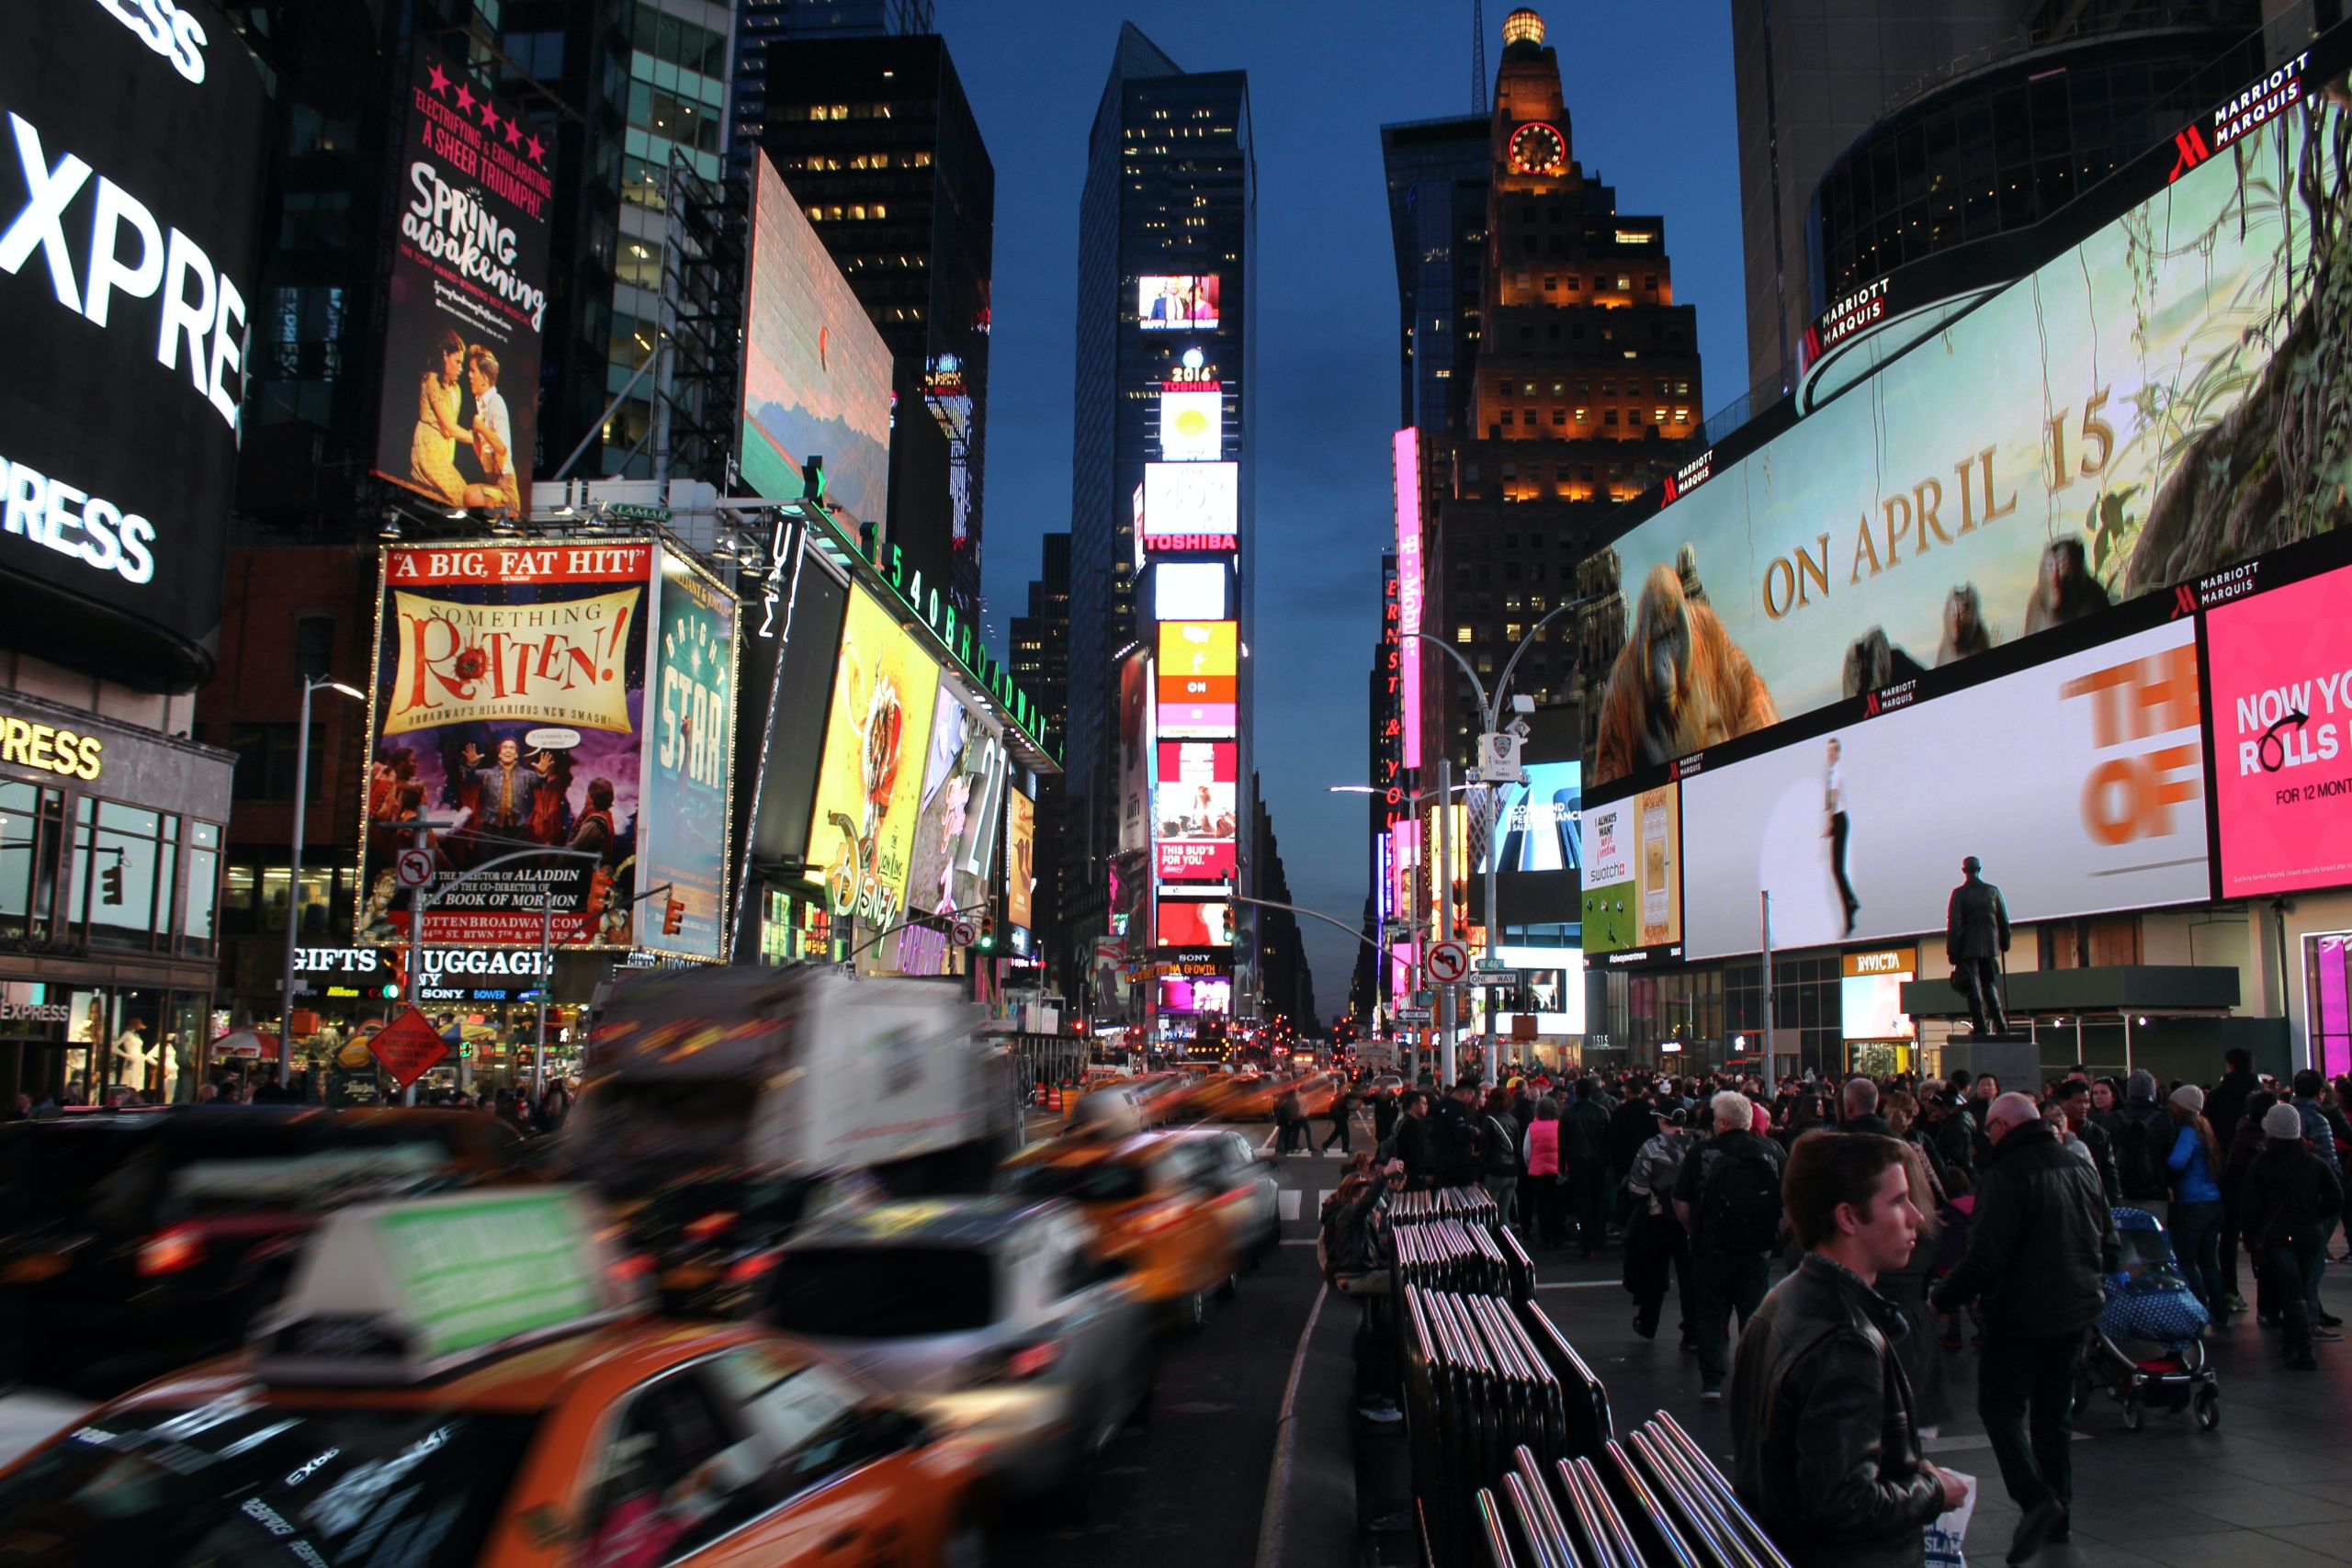 Broadway Theatre in Times Square. Photo by Owen Barker via Pexels